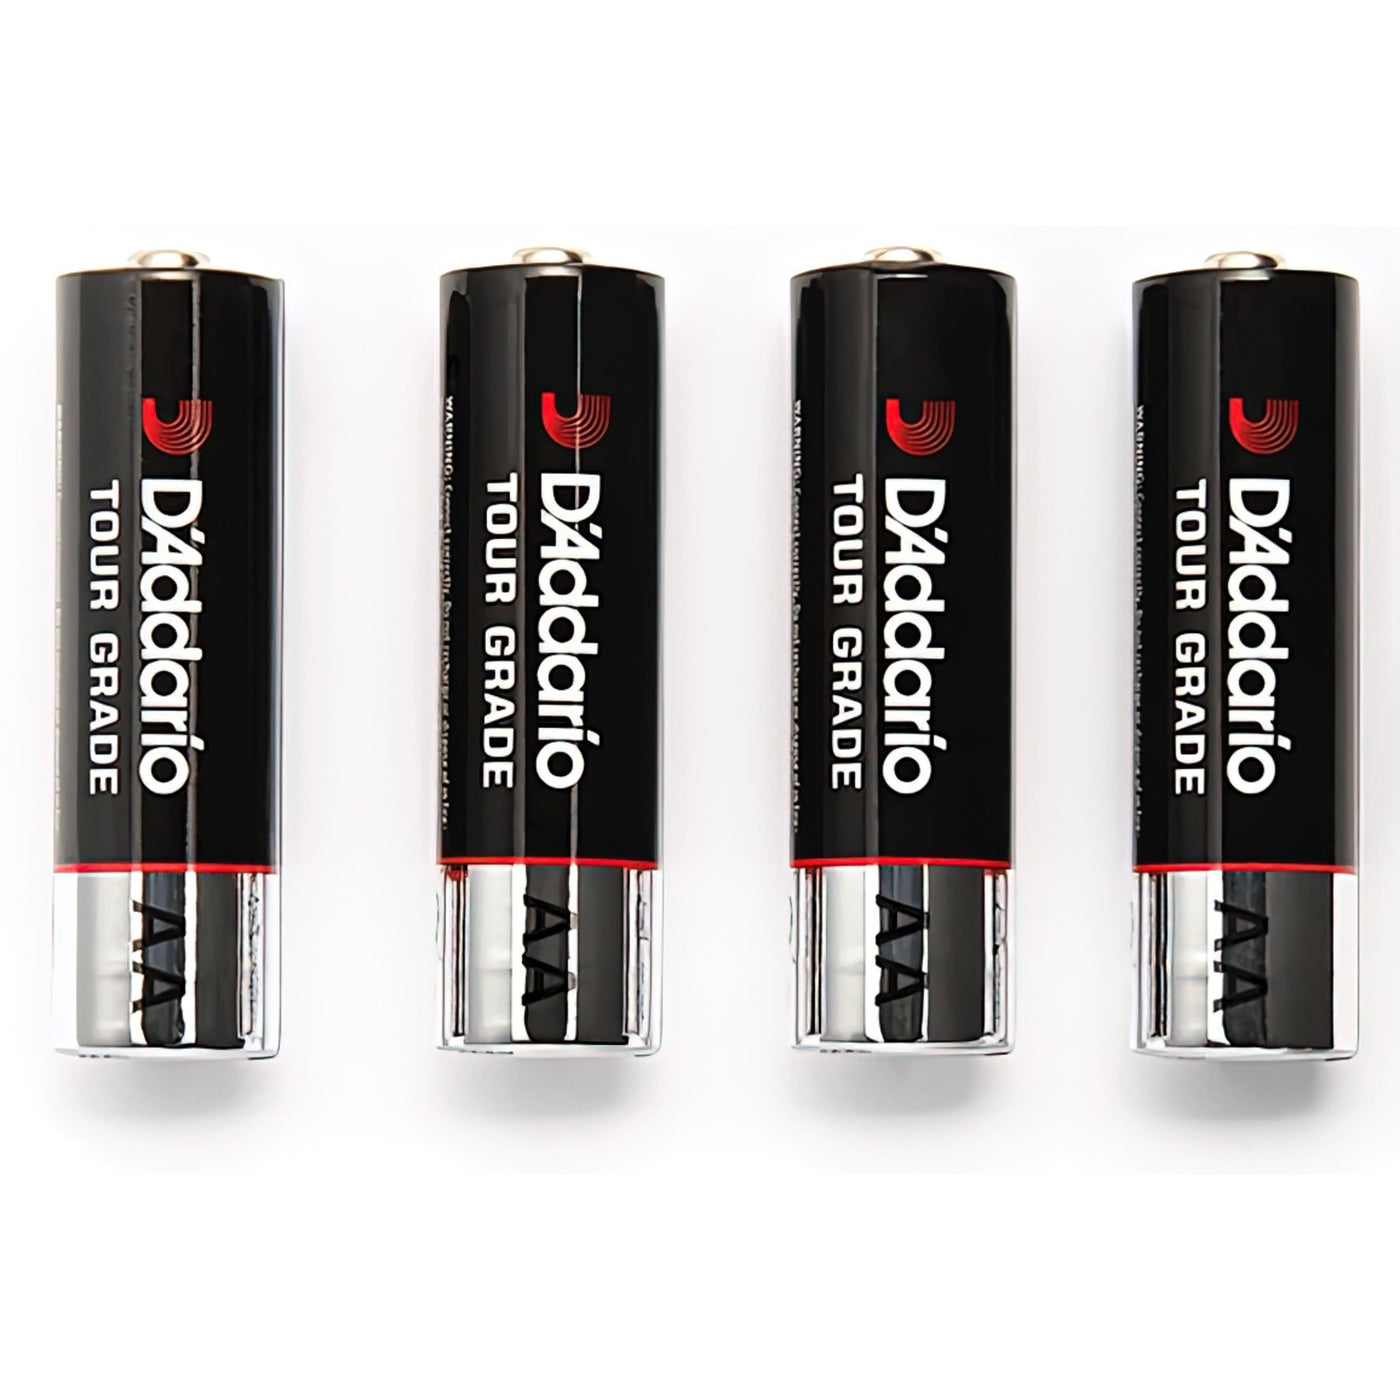 D'Addario AA Battery, 4-Pack (PW-AA-04)